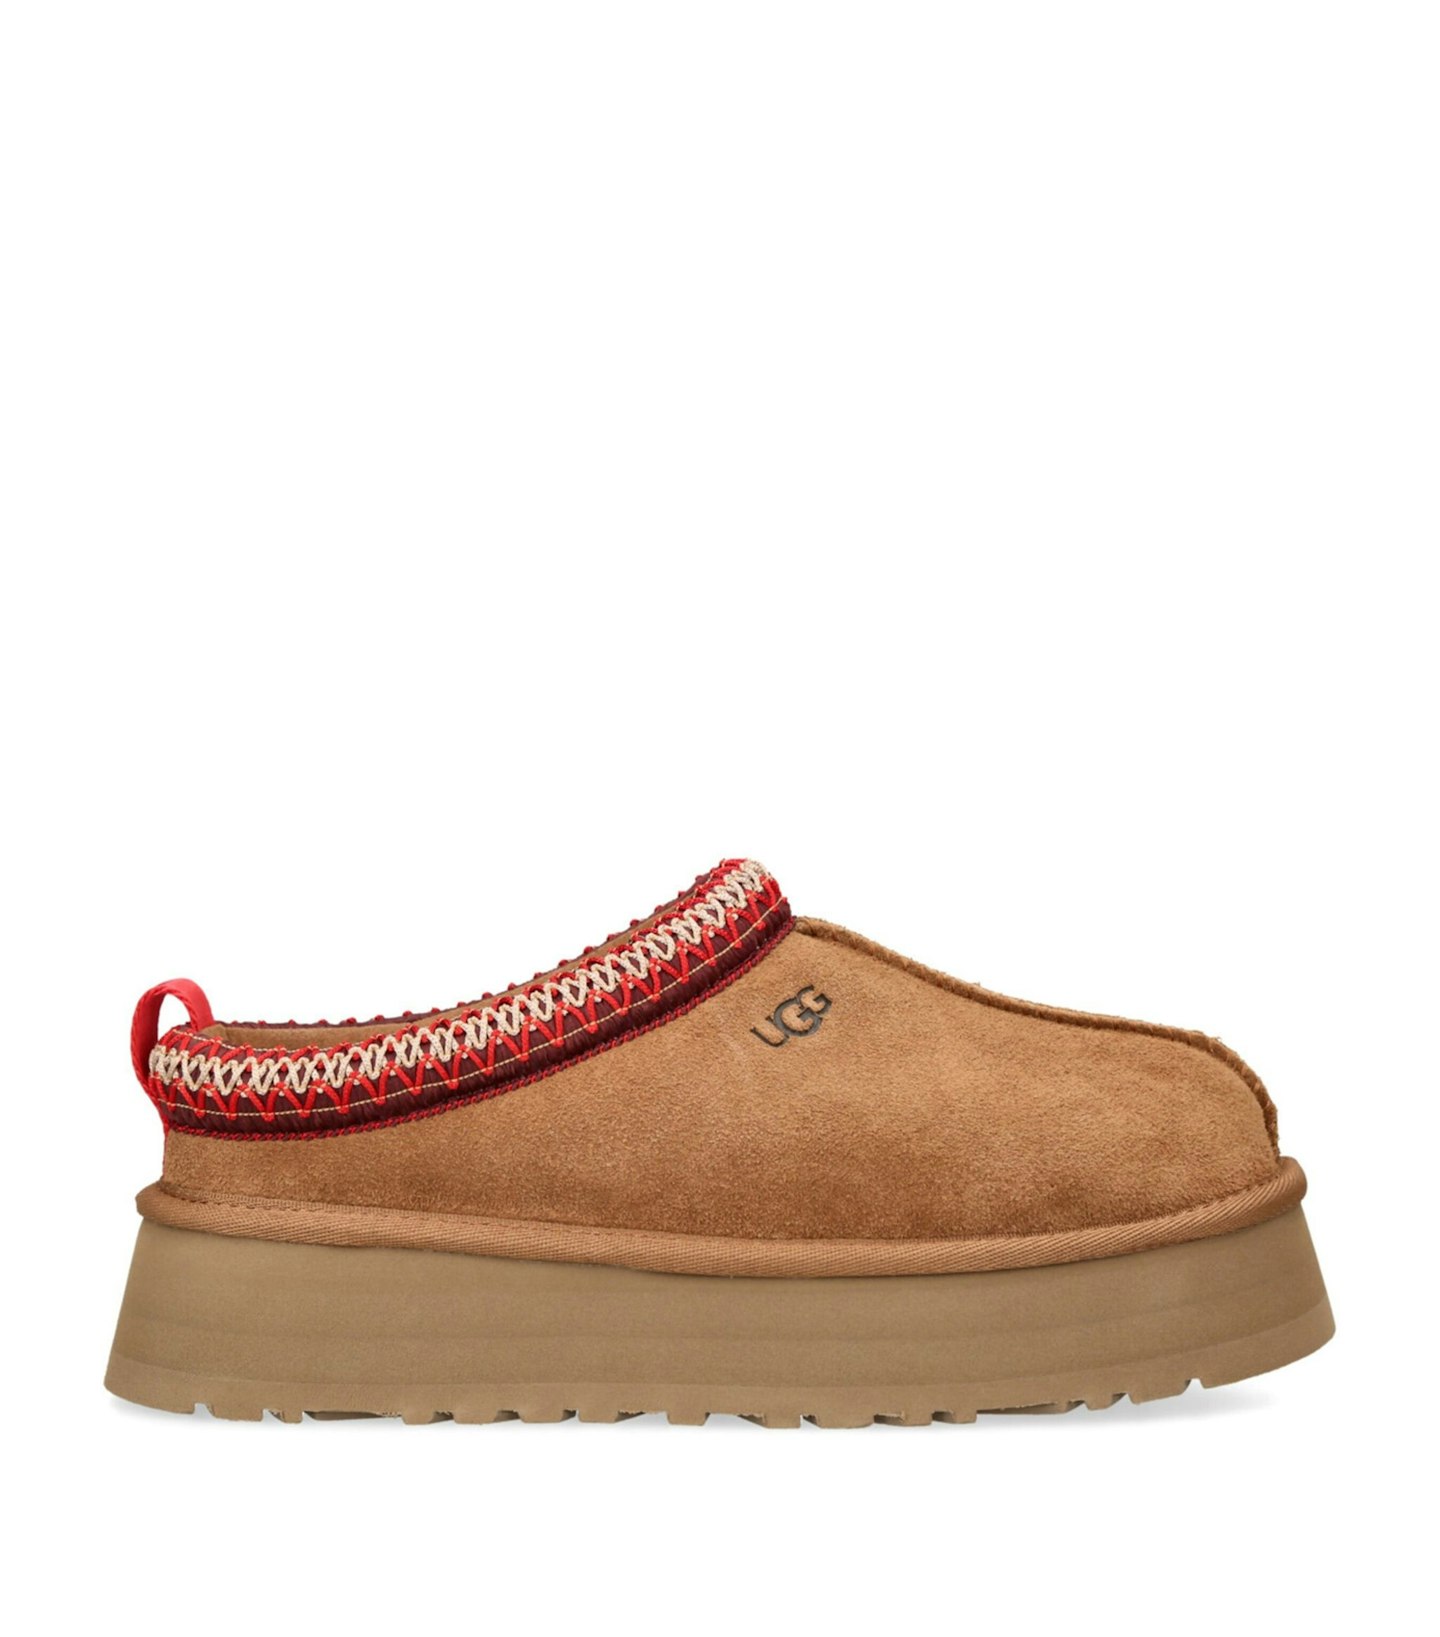 UGG Suede Tazz Slippers